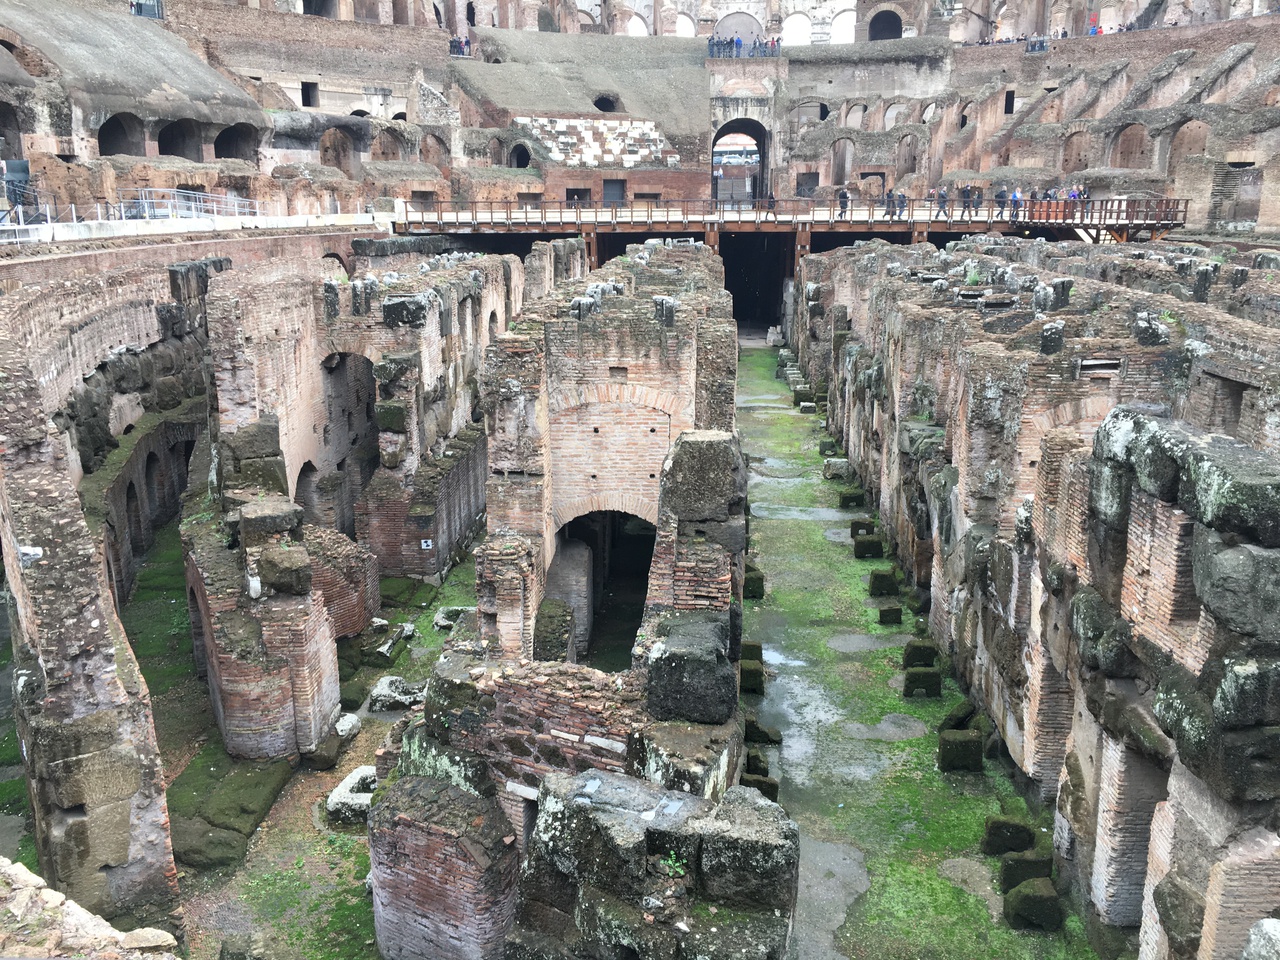 View inside the coliseum, from one of the lower floors down into the basement area, Rome